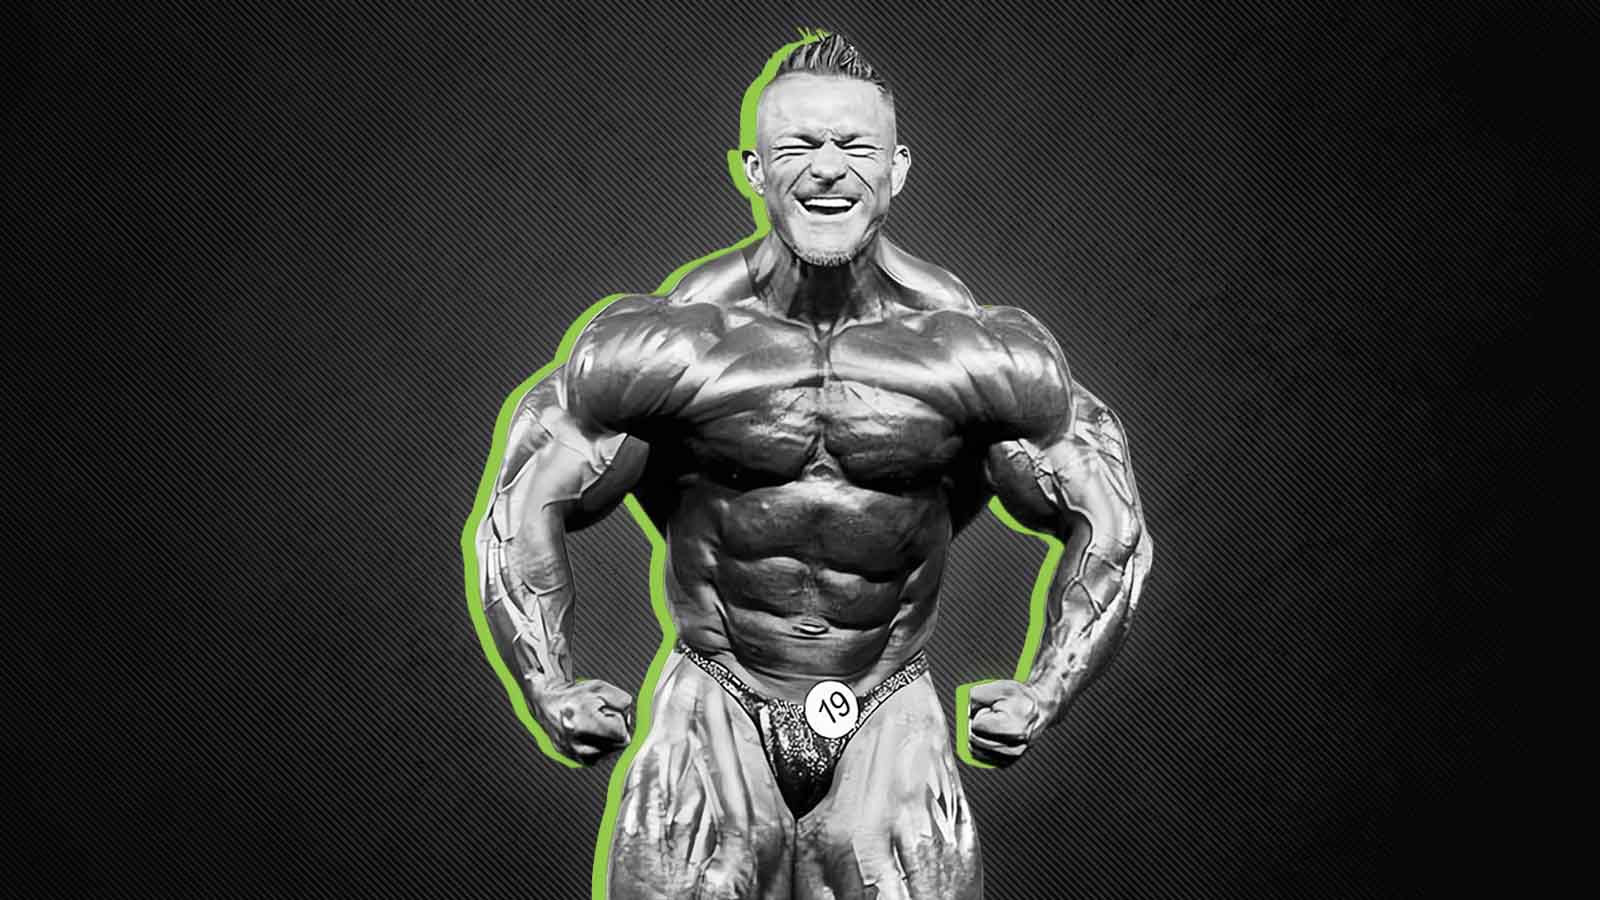 Spartan Series #43 “Flex Lewis, It's You vs You!” – Six Pack and Senior